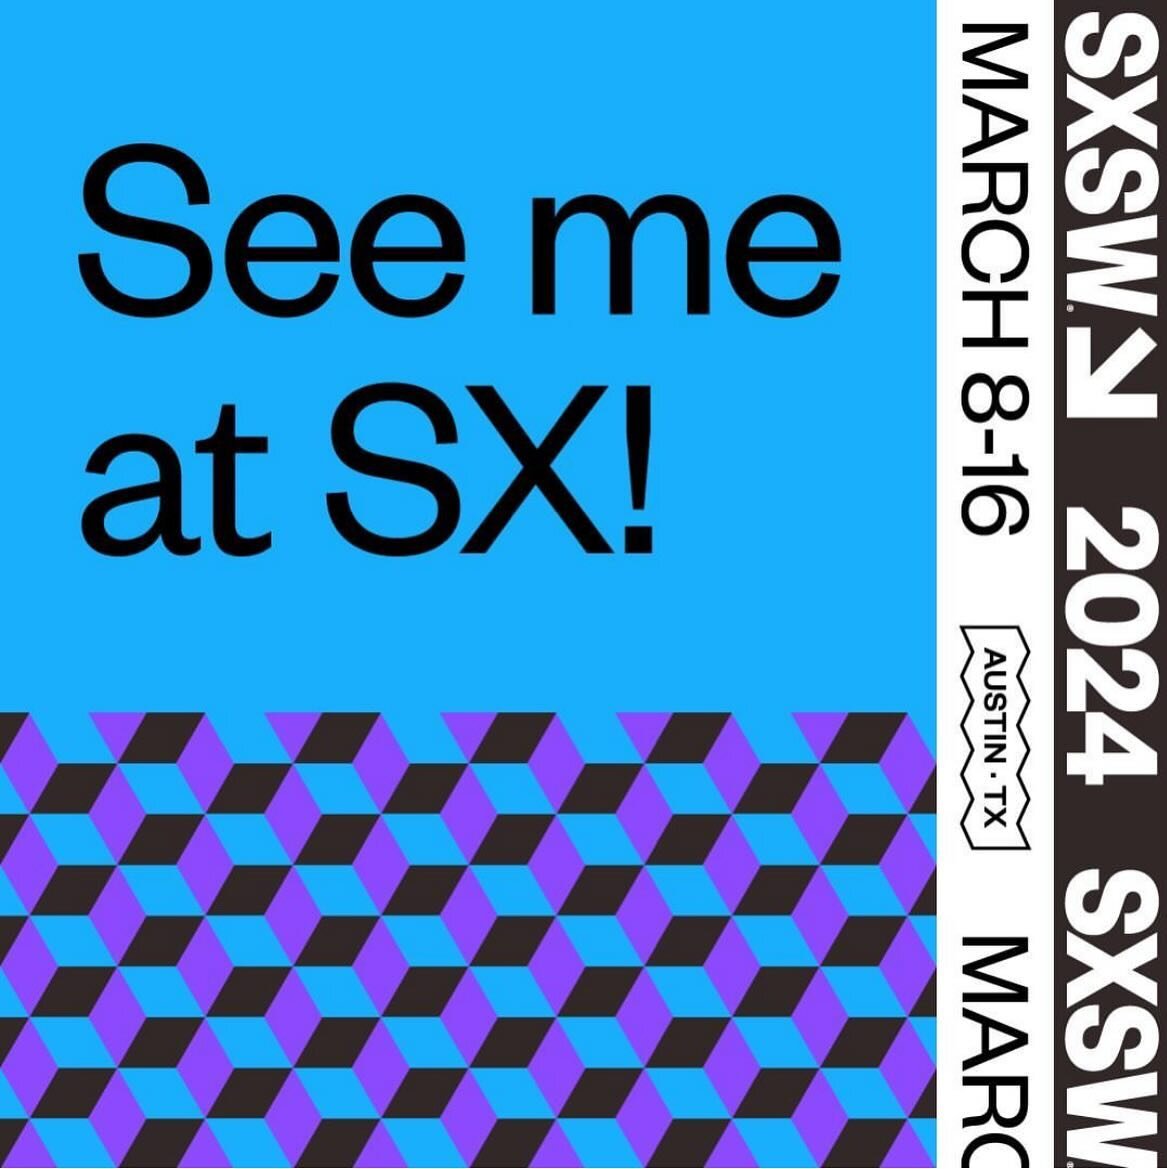 Join us at SXSW for a panel, &ldquo;Thanks, We Made it Ourselves! The Native Storytelling Wave&rdquo;. We discuss how Native creatives are changing the media landscape and uplifting Native stories.

We&rsquo;ll unpack the latest data which shows how 